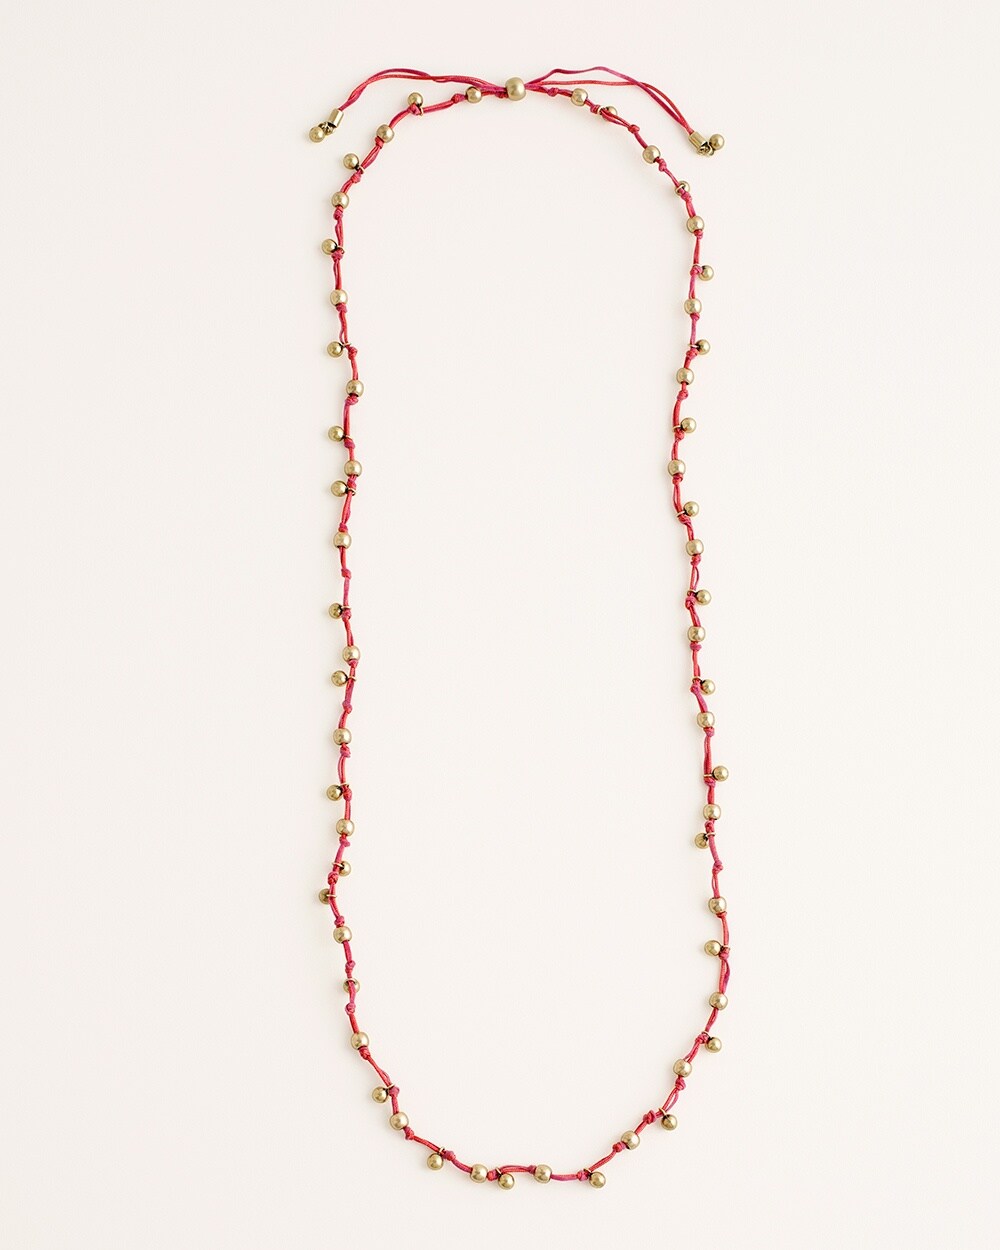 Long Cherry-Colored Beaded Necklace